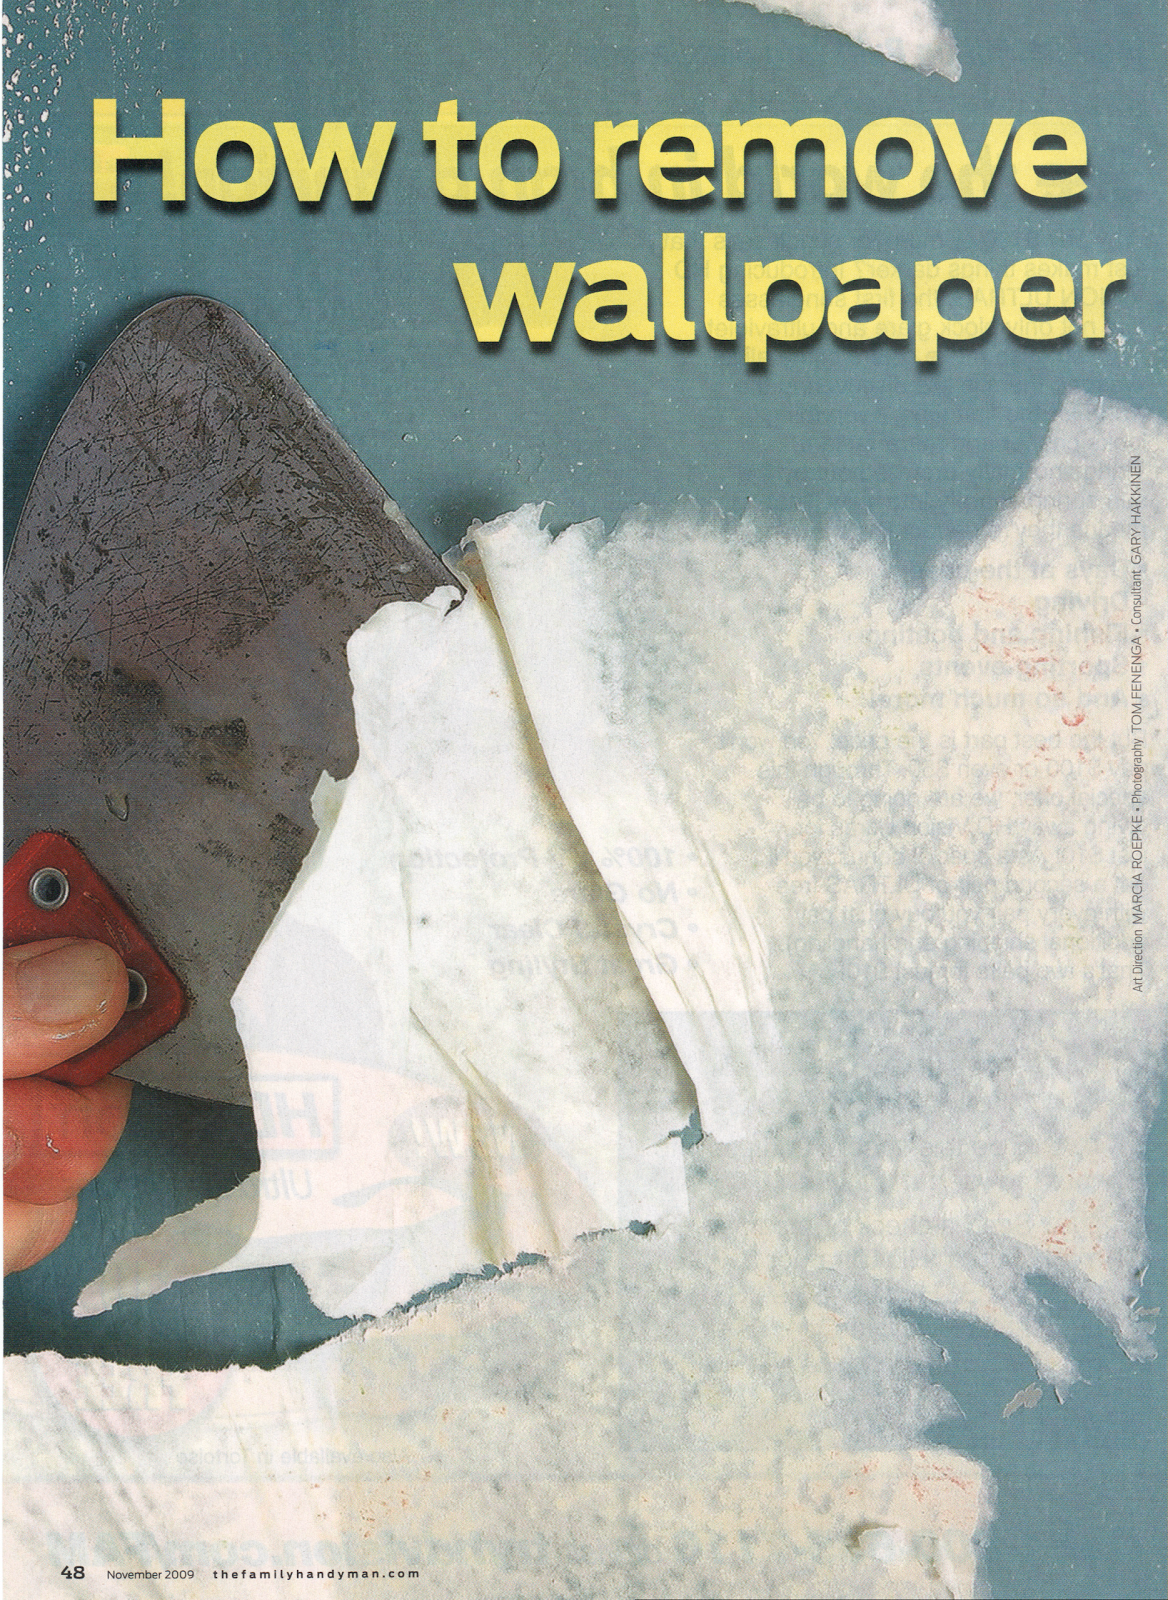 Pignotti Property Inspections: How to Remove Wallpaper